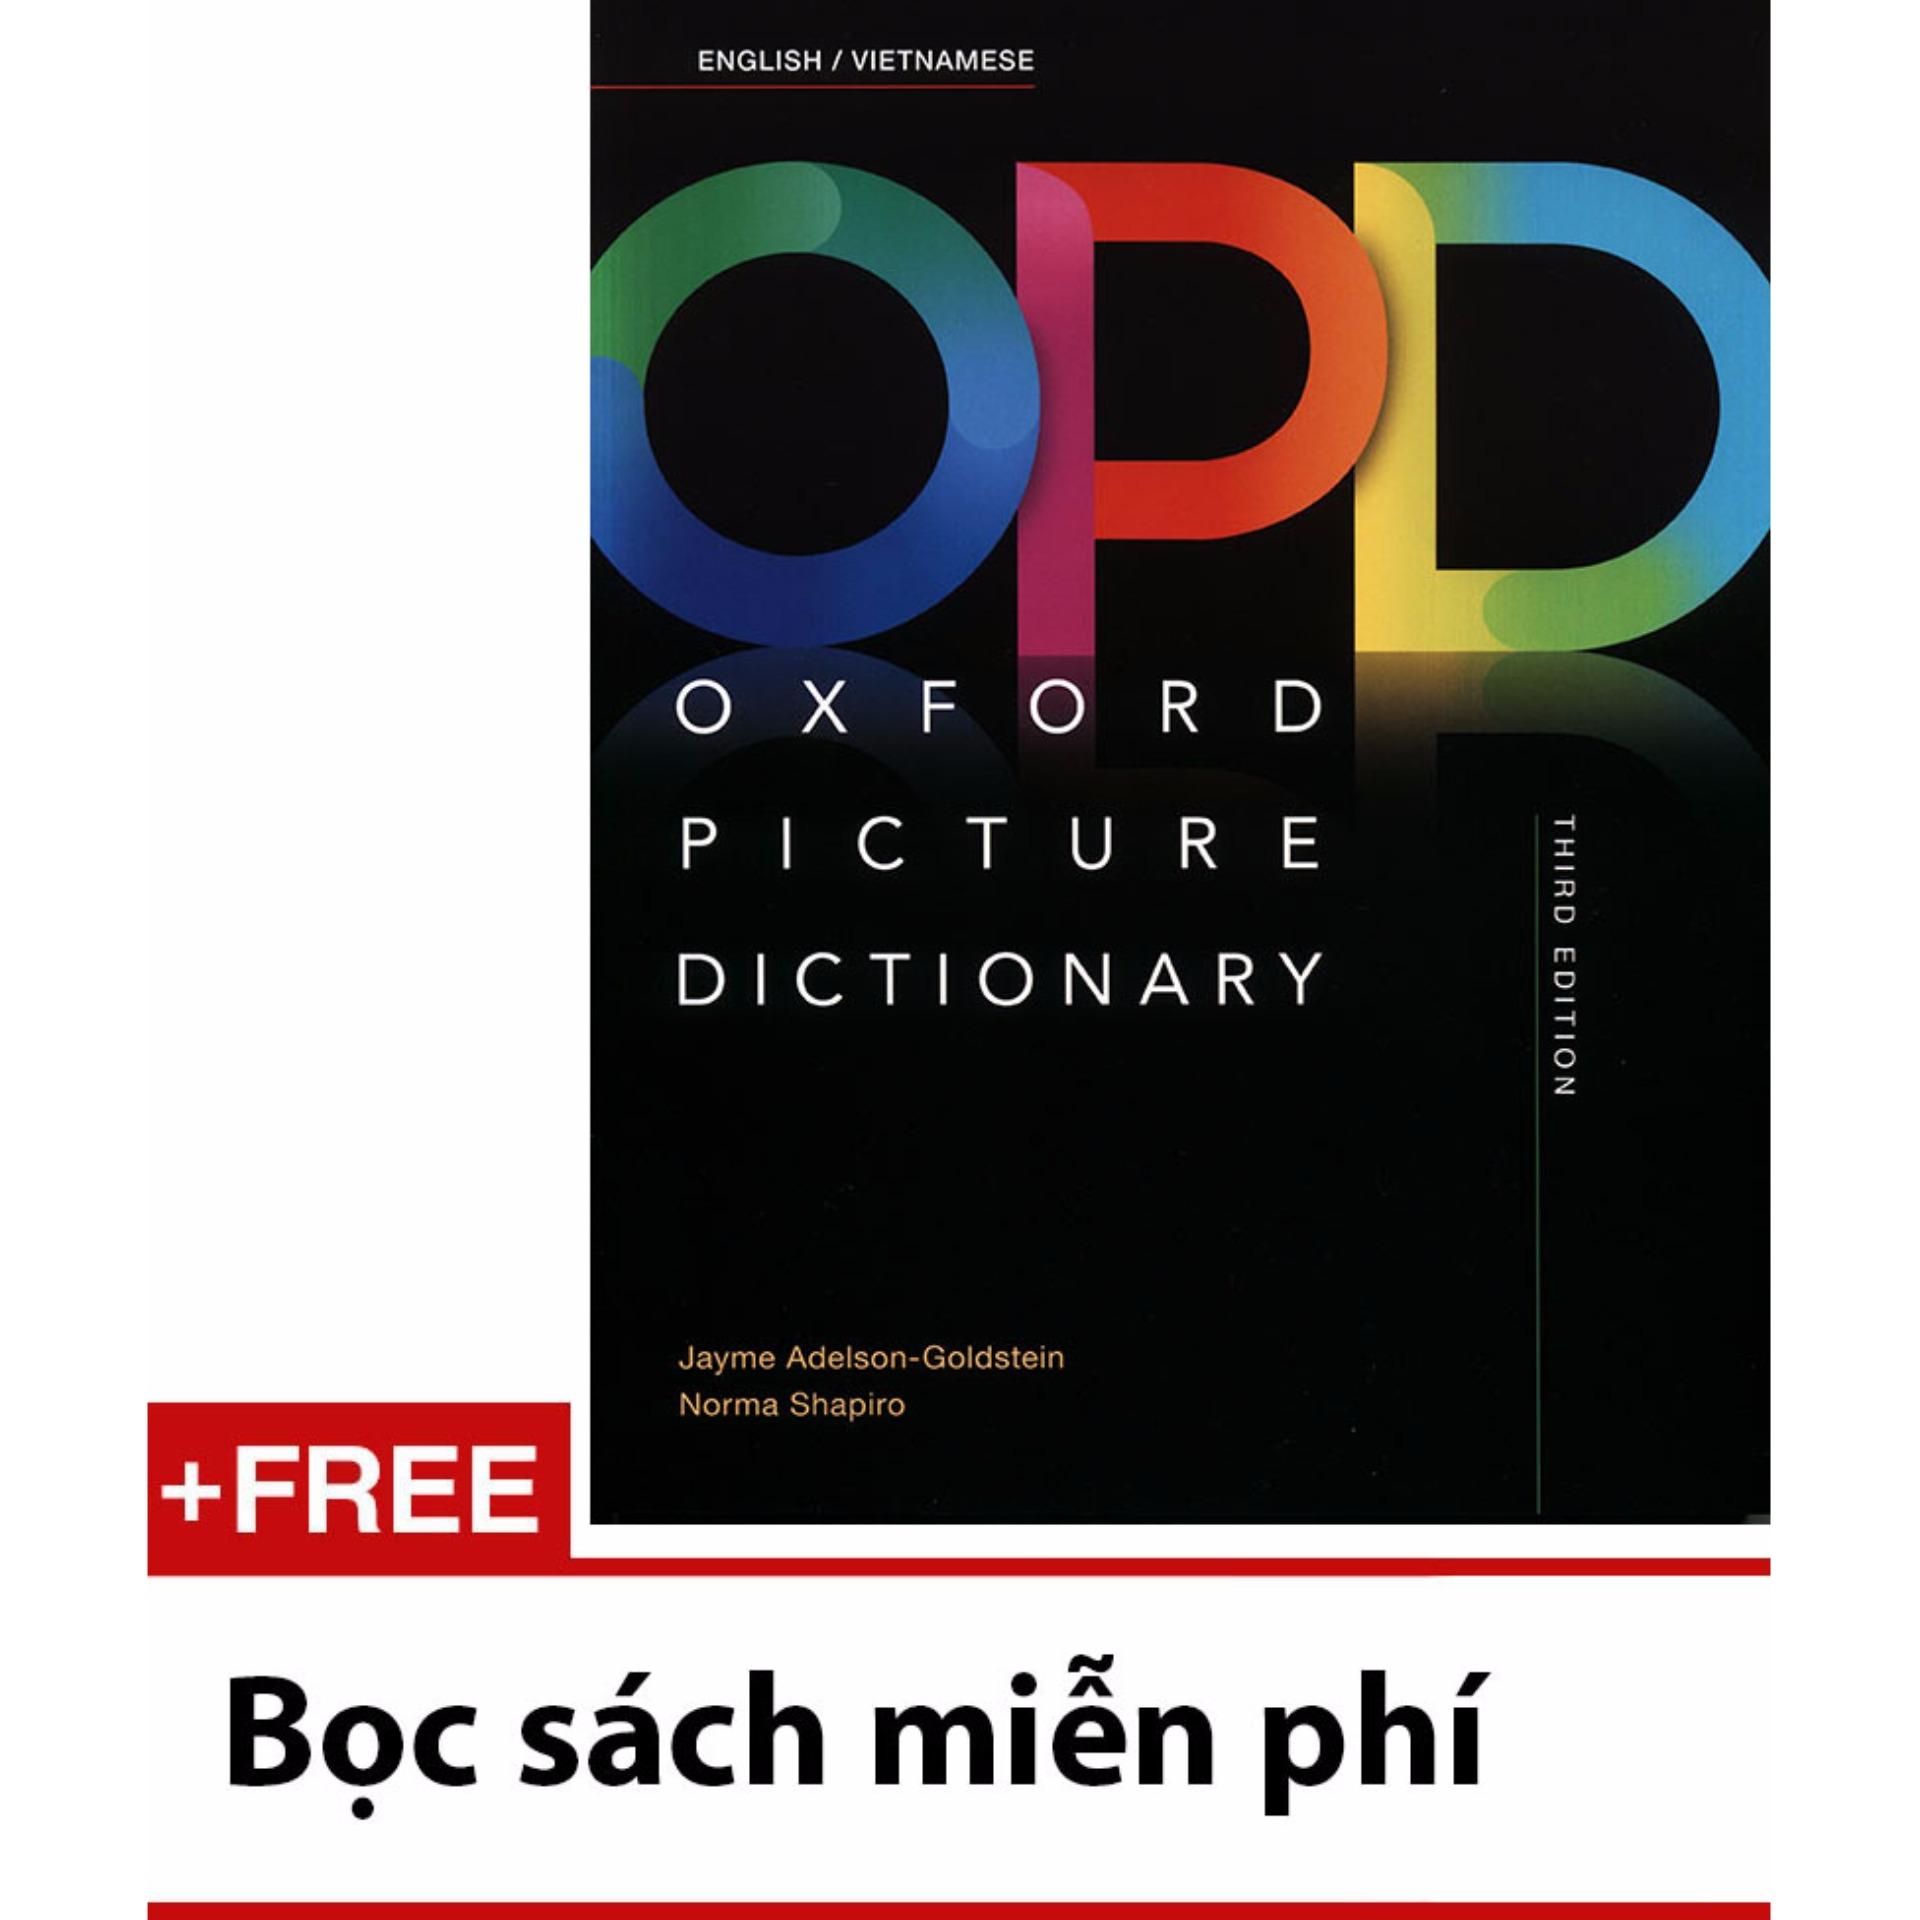 Oxford Picture Dictionary - English/Vietnamese - Third Edition